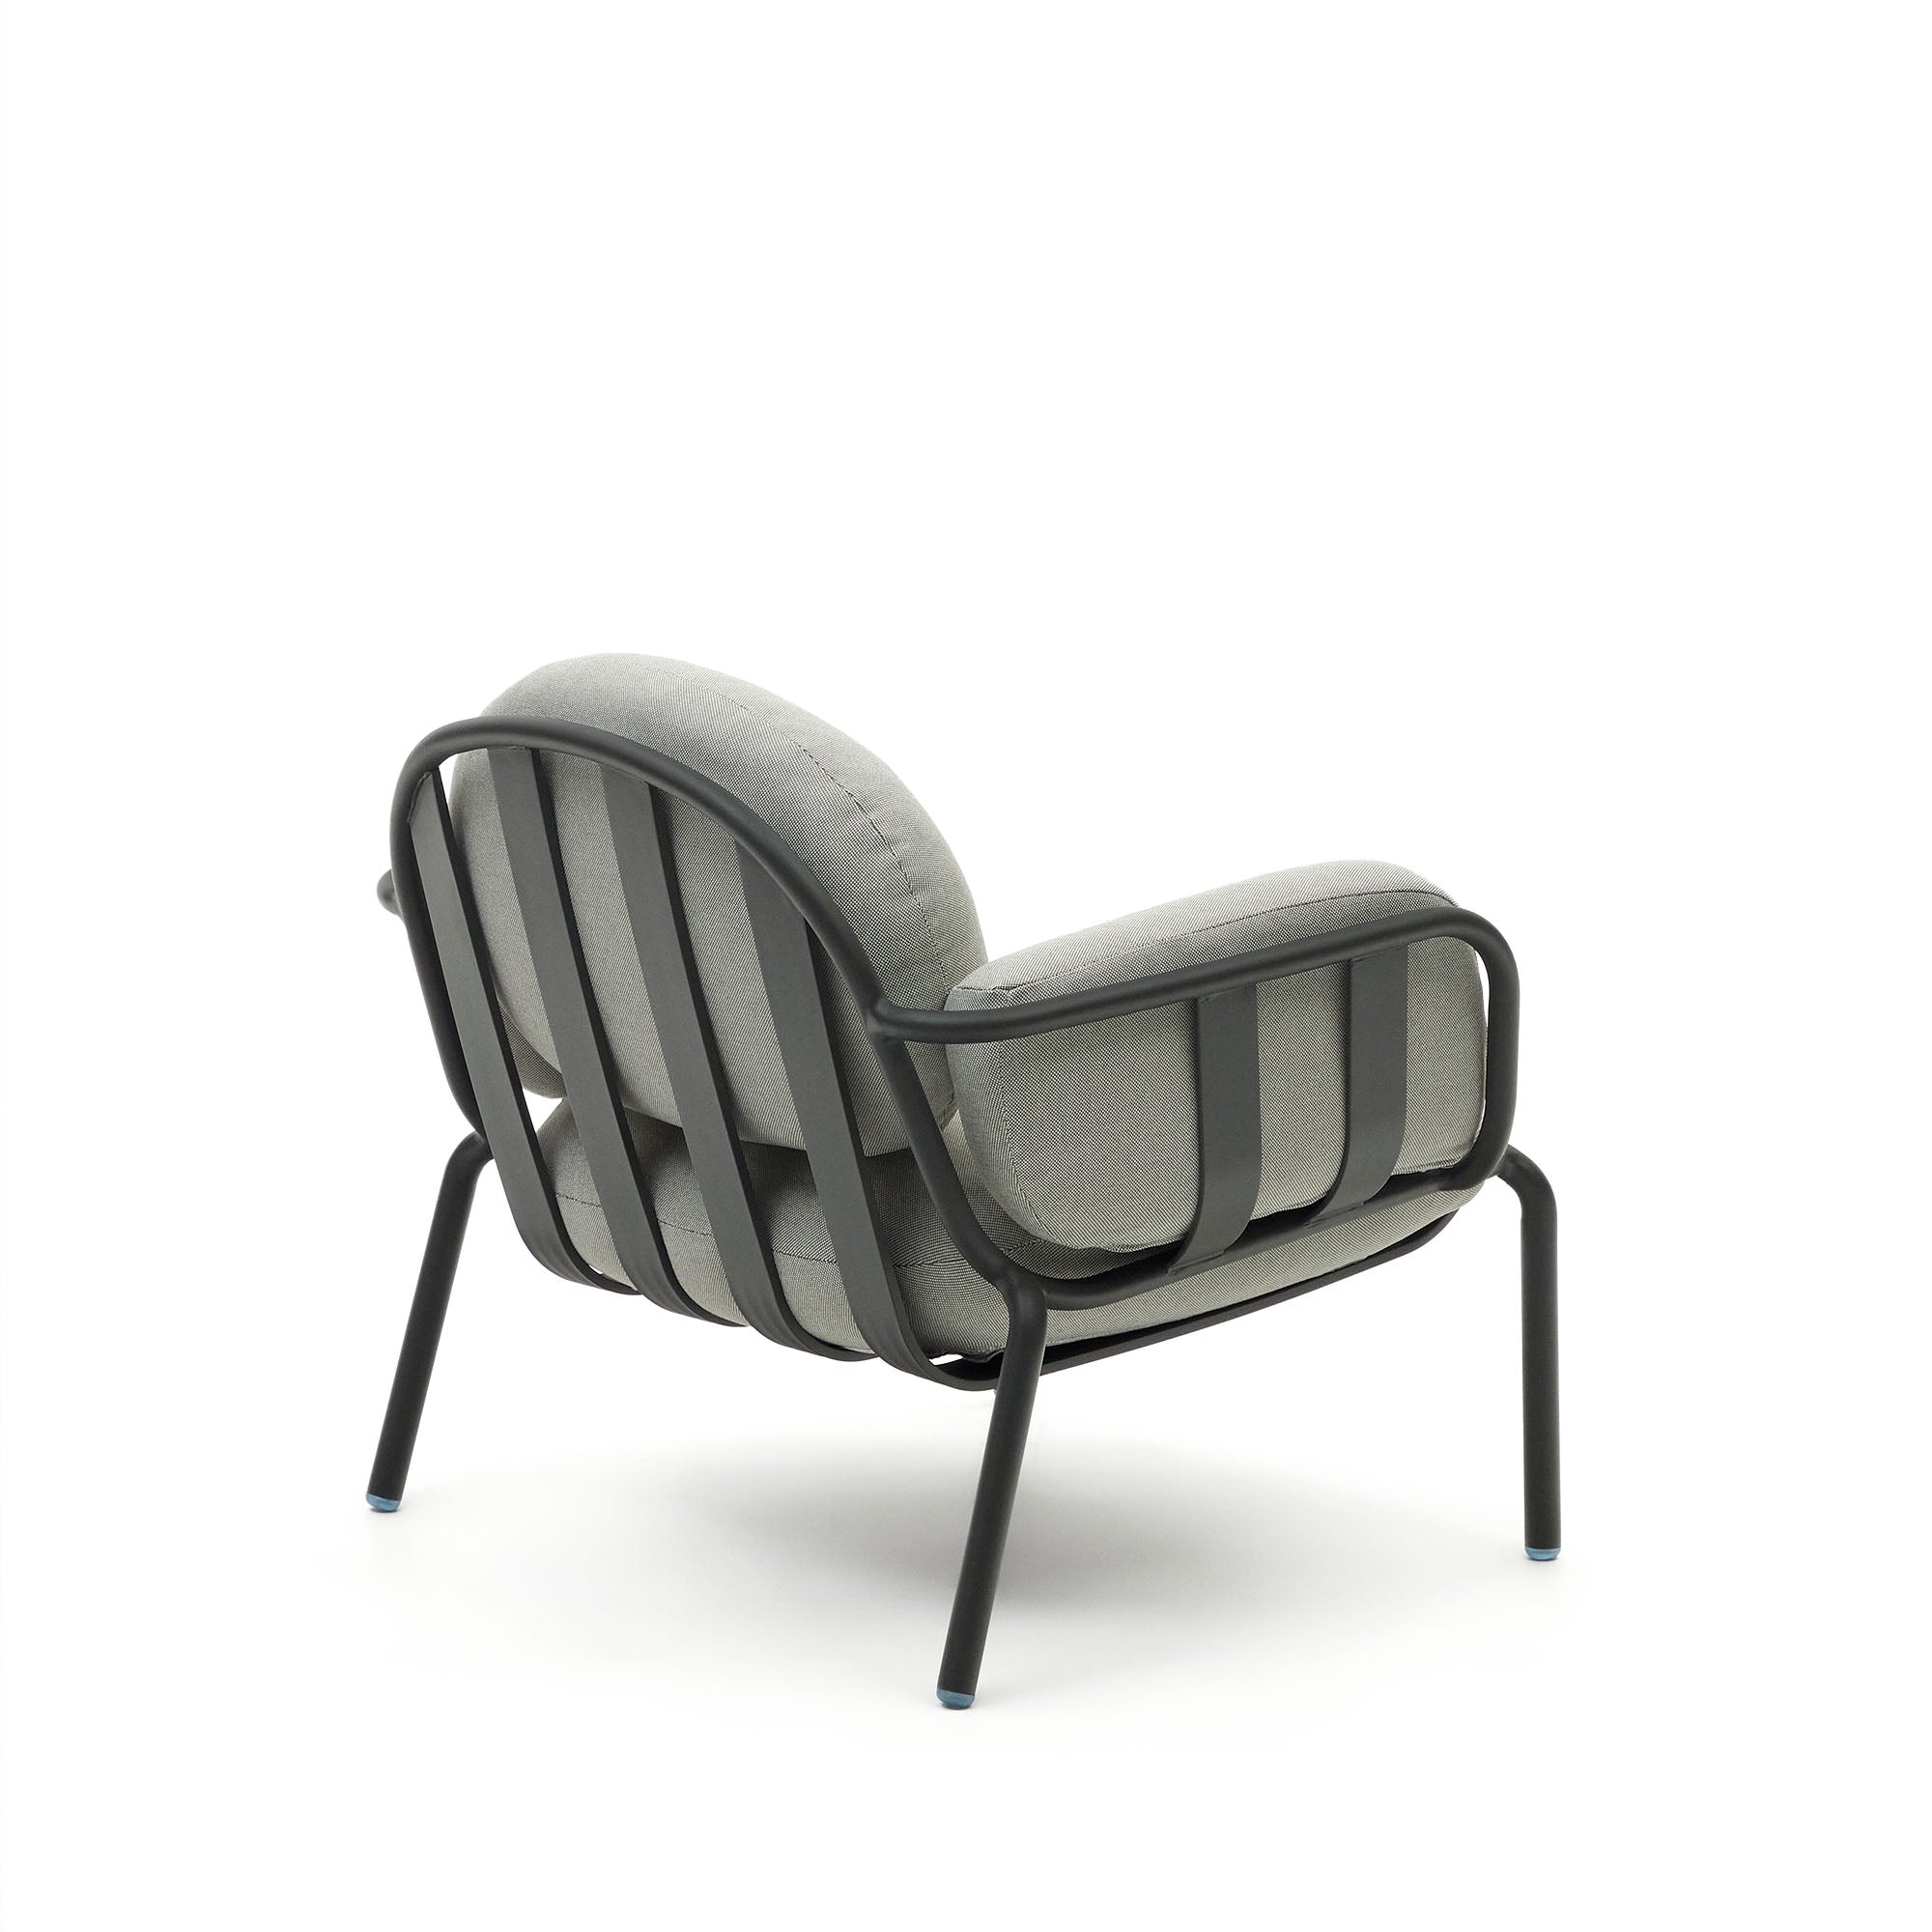 Joncols outdoor aluminium armchair with a powder coated grey finish